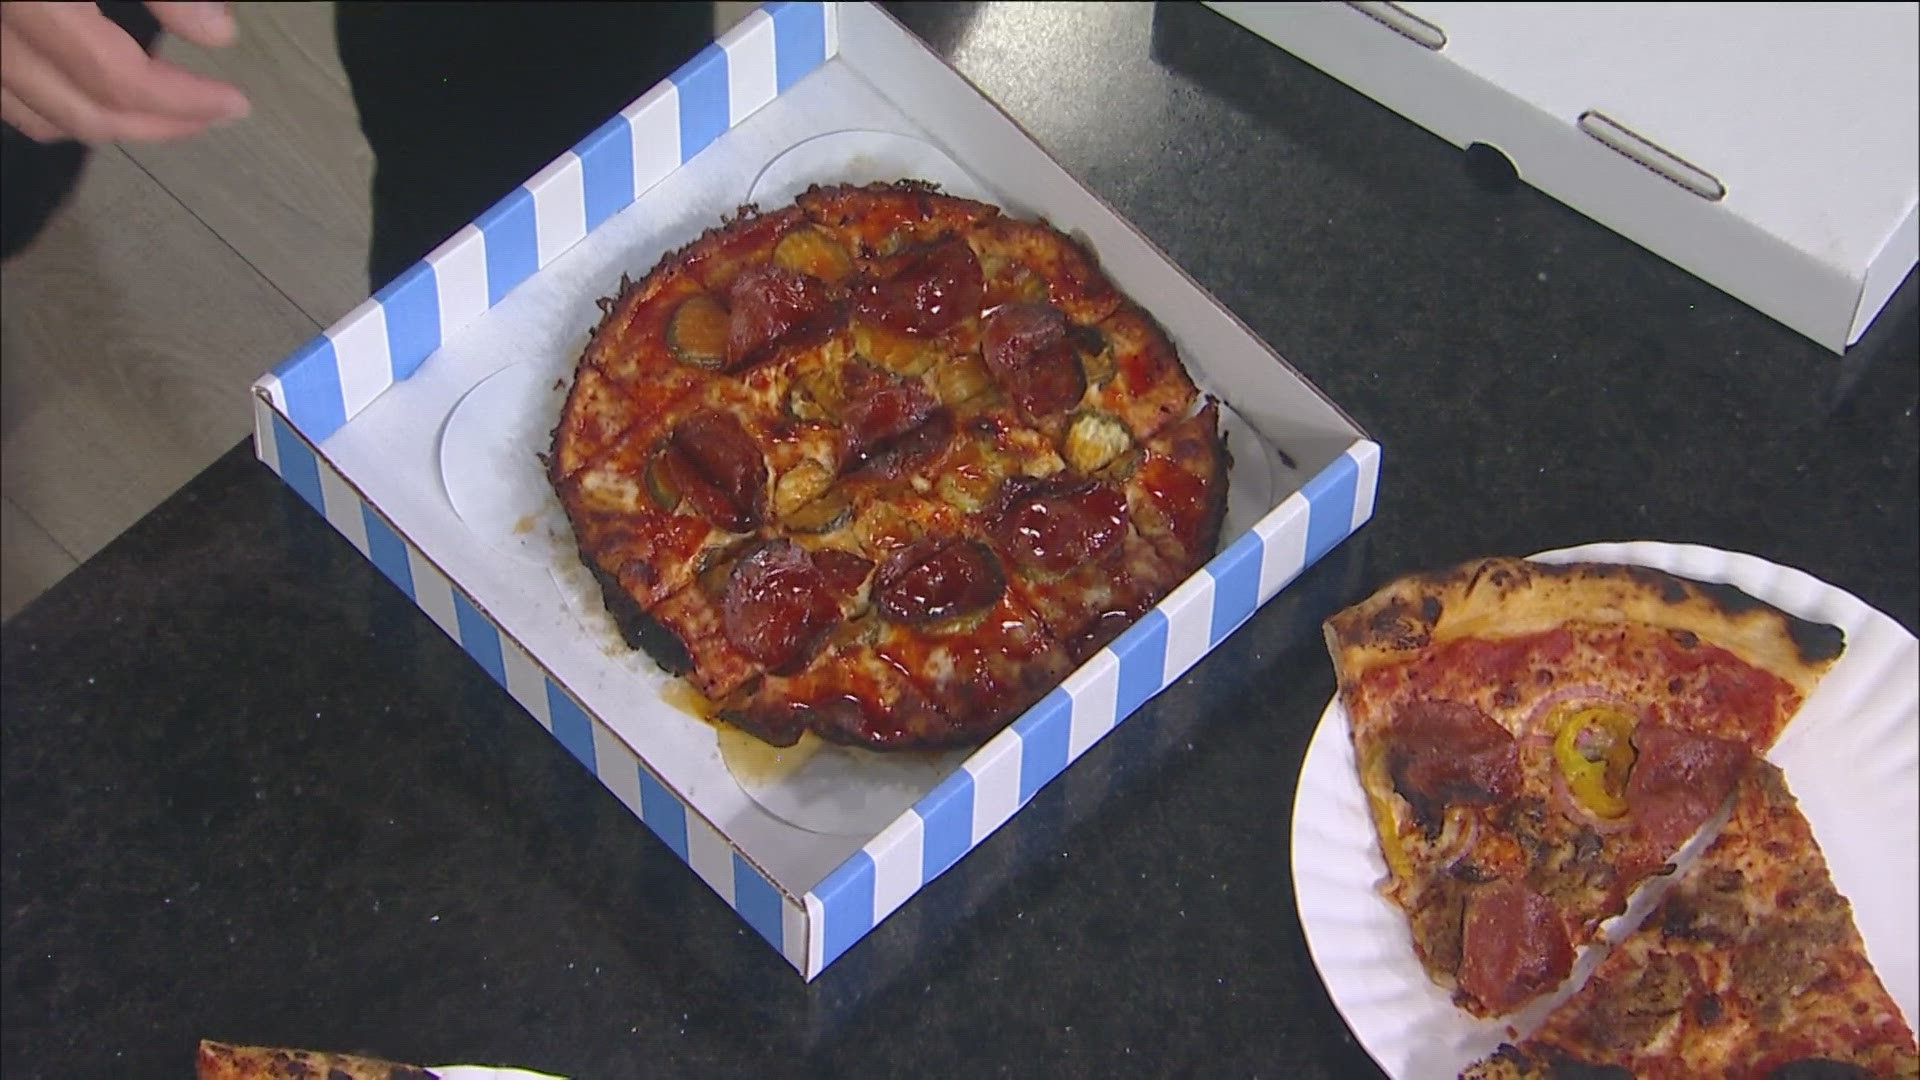 The locally-owned restaurant is also offering its pizza by the slice.